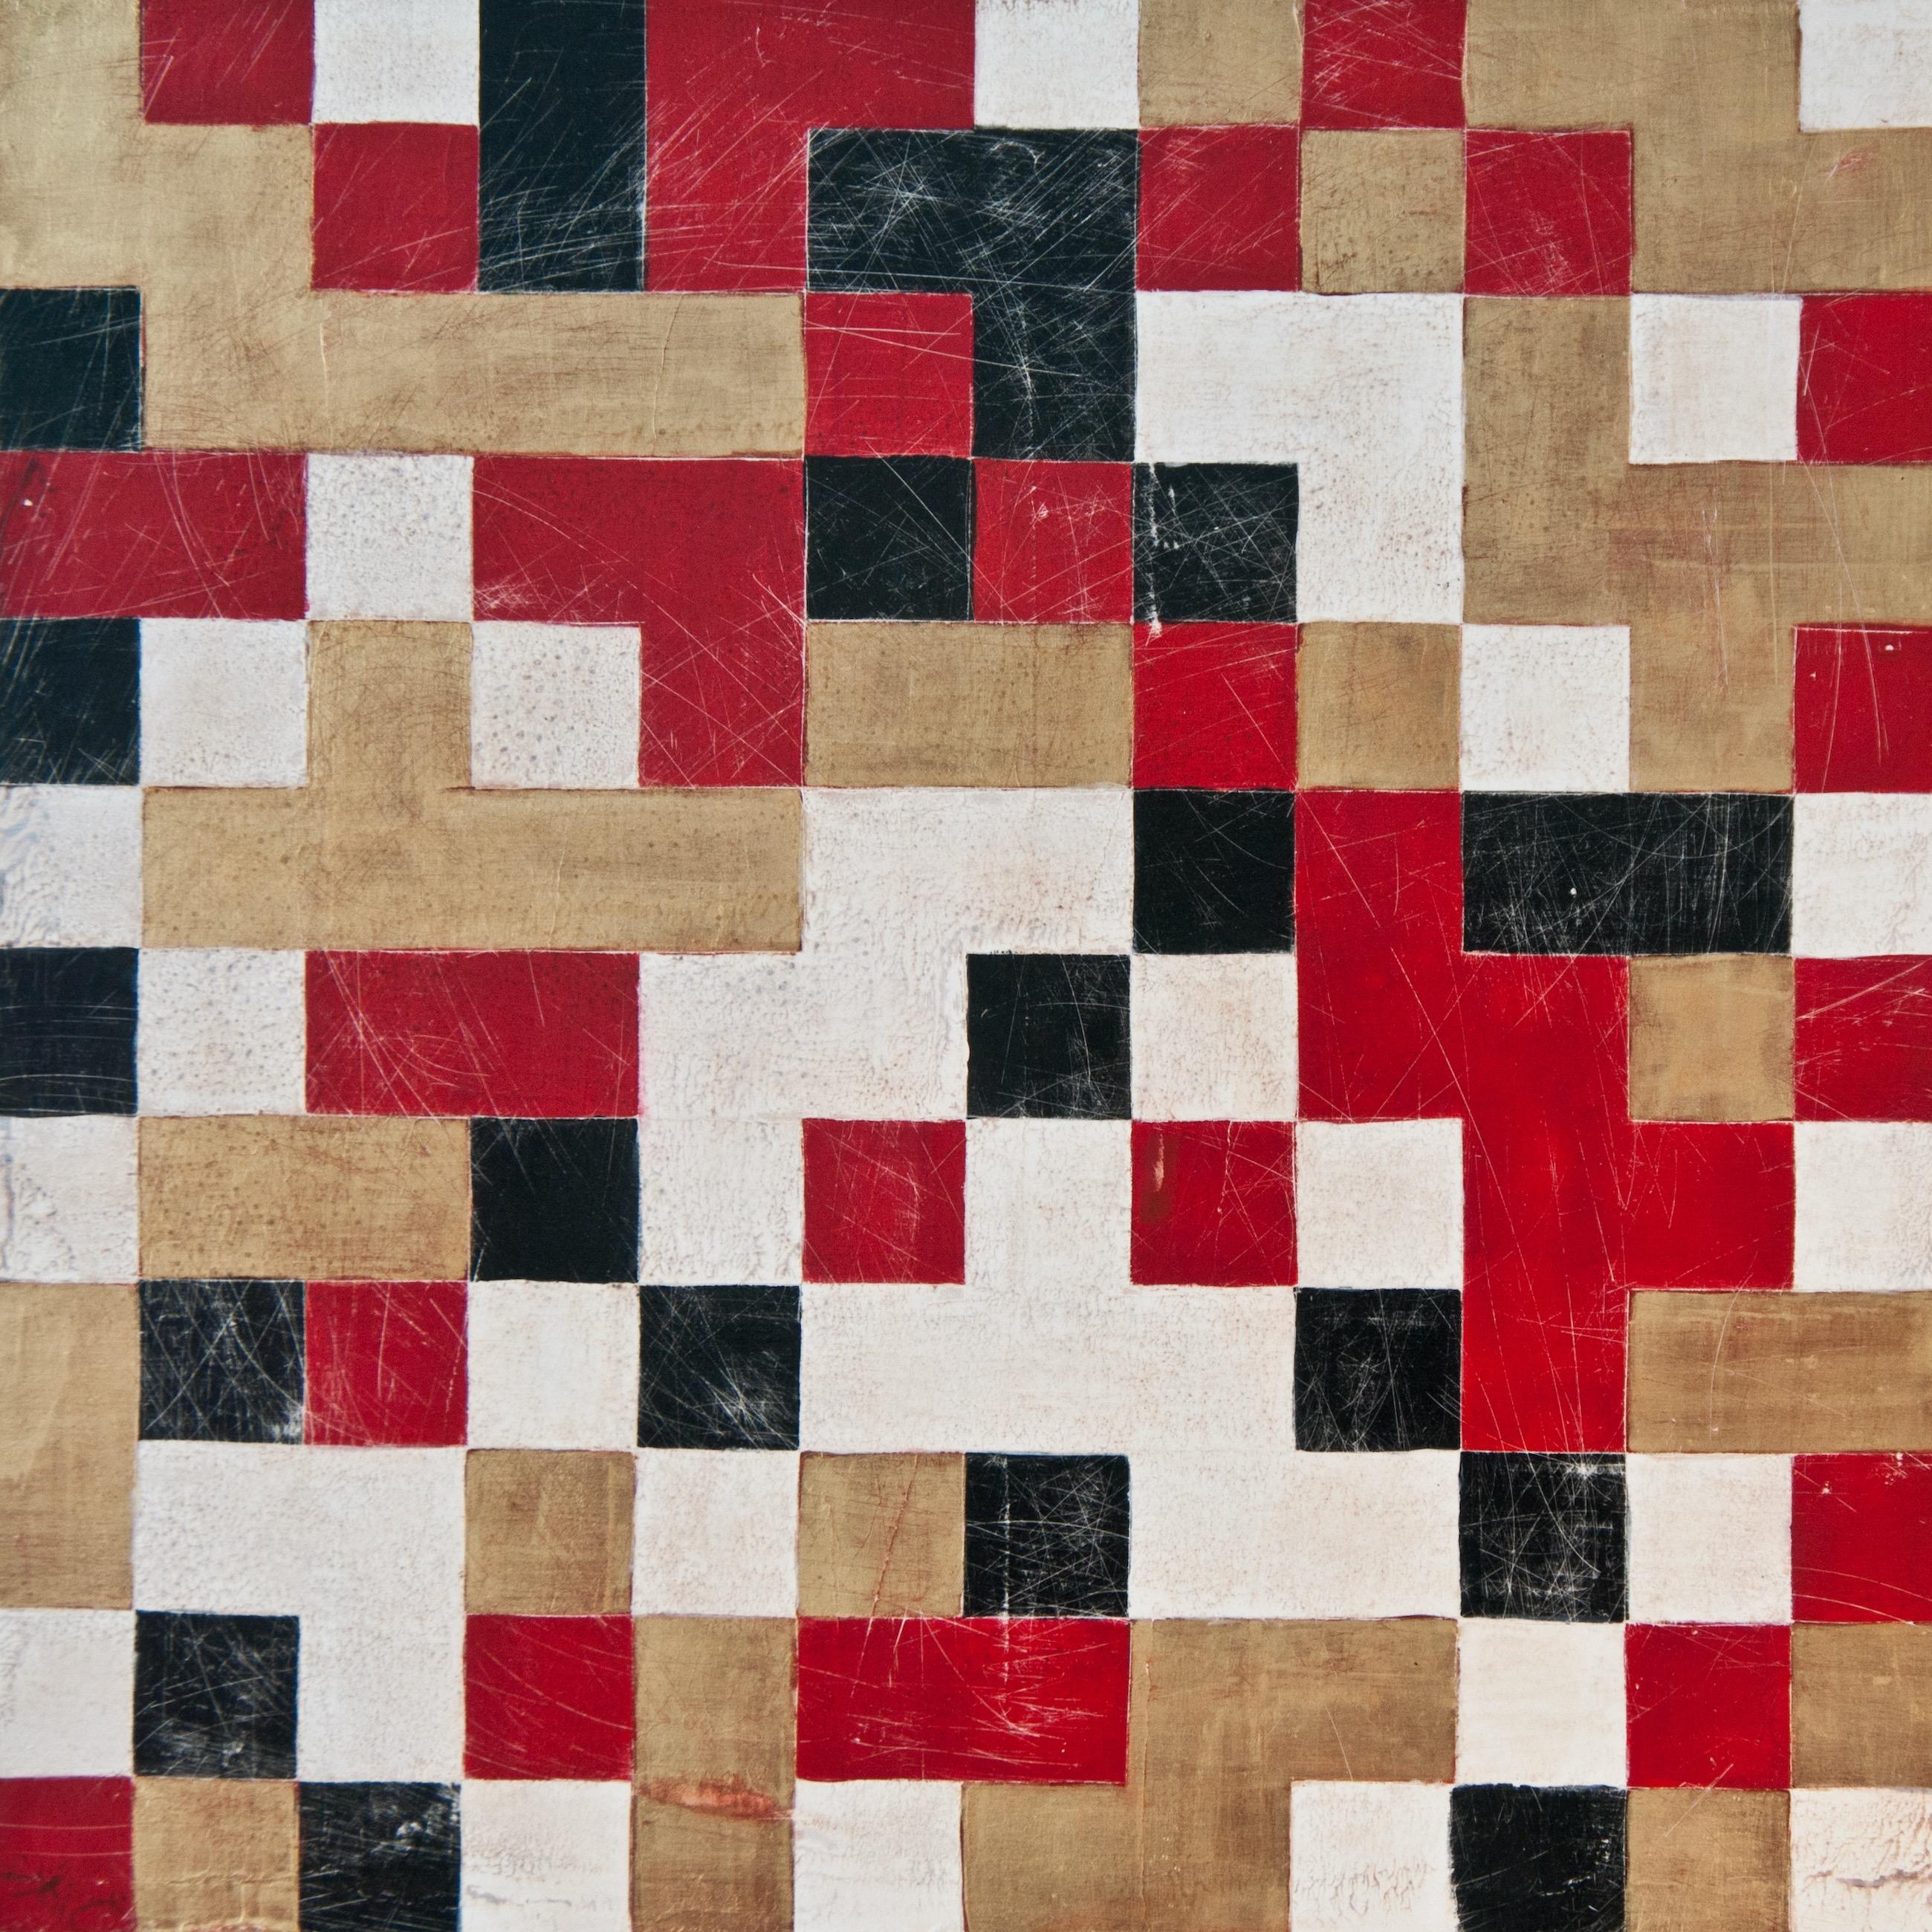 Denise Driscoll Abstract Painting - "Encoded 3", abstract, geometric, red, black, gold, white, acrylic painting